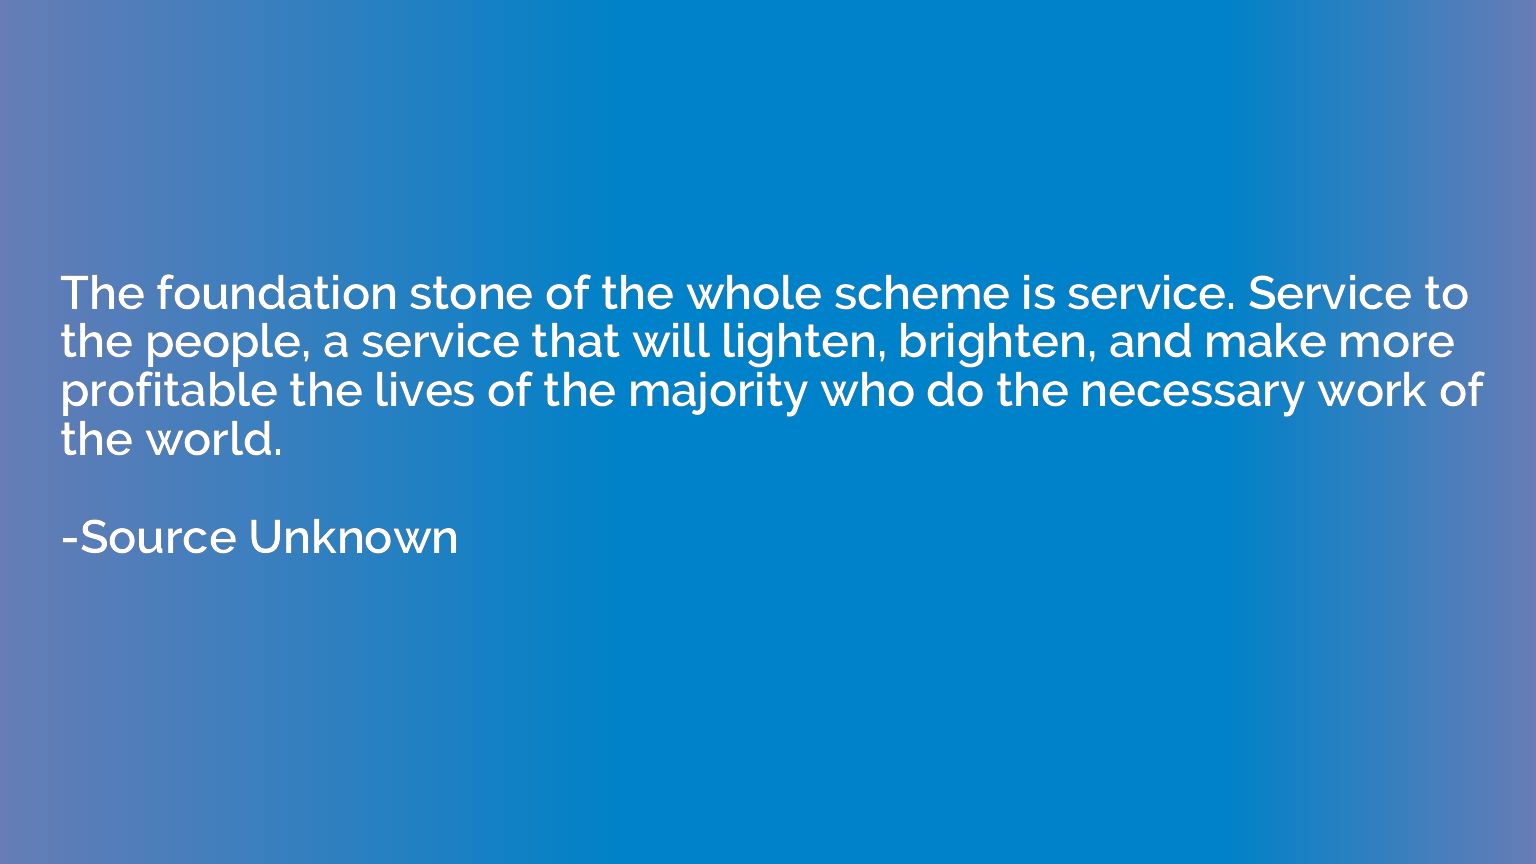 The foundation stone of the whole scheme is service. Service